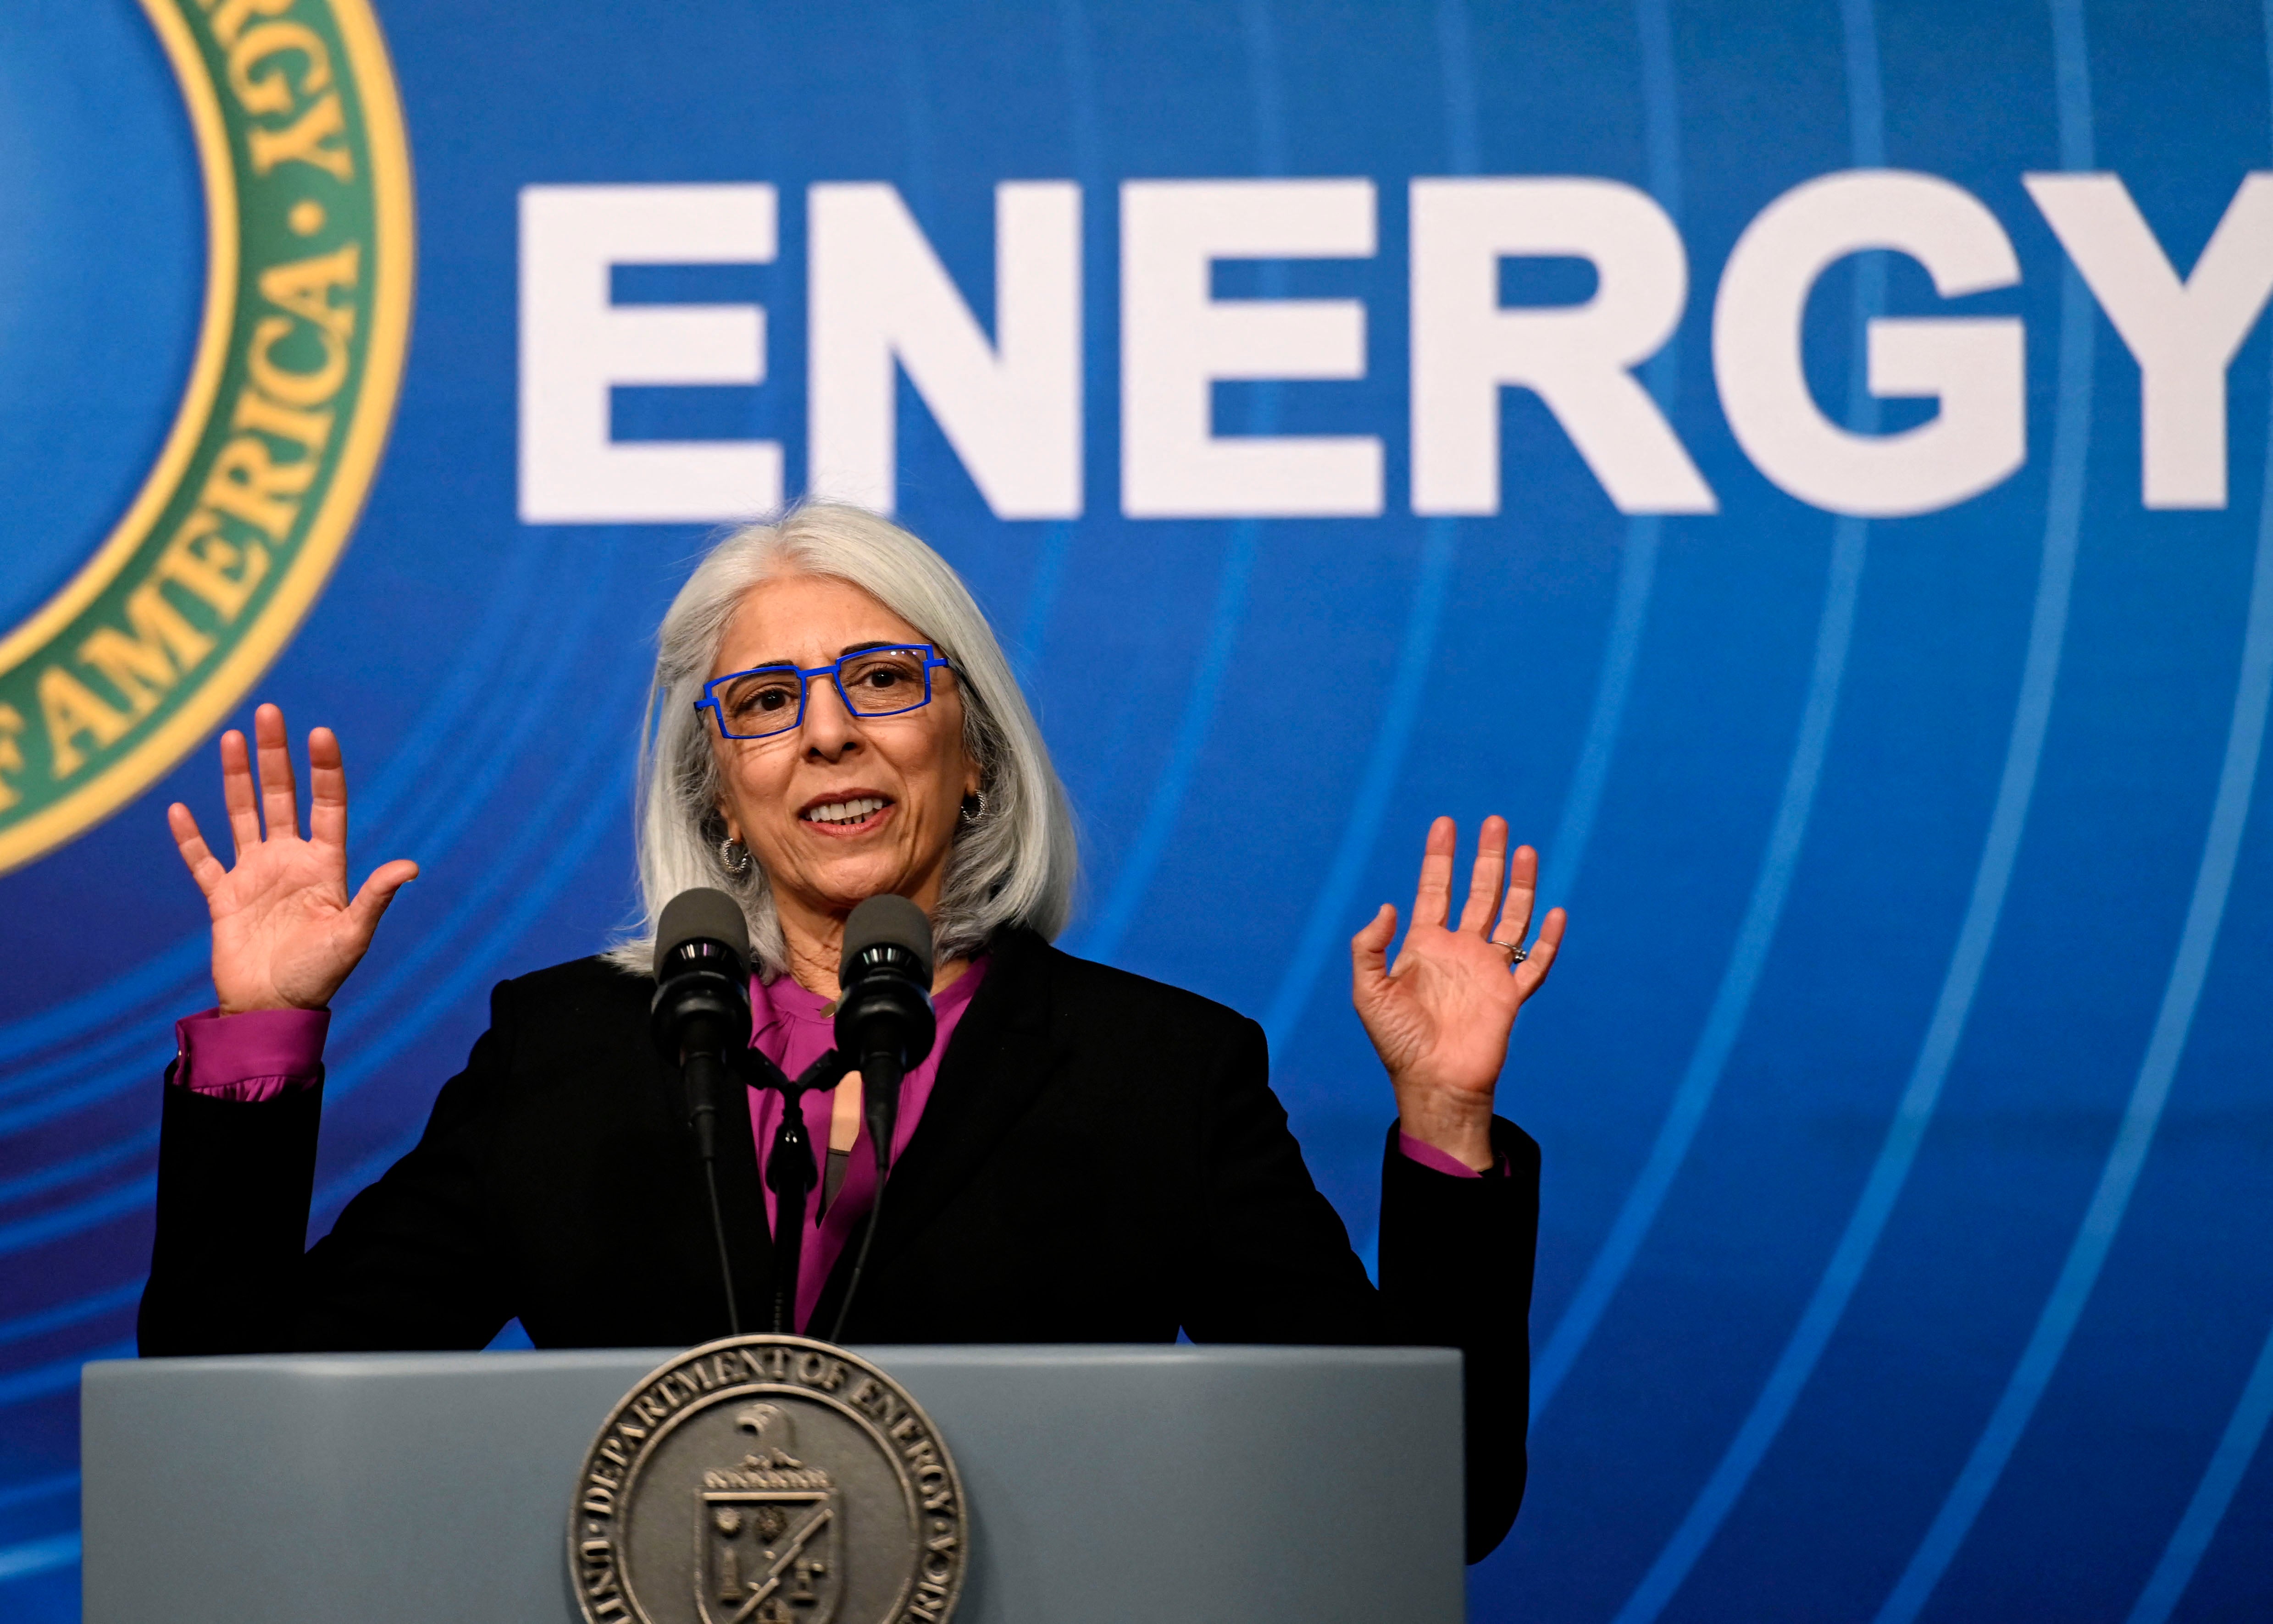 Director of the White House Office of Science and Technology Policy Arati Prabhakar speaks during a press conference to announce a major milestone in nuclear fusion research at the US Department of Energy in Washington, DC, on December 13, 2022